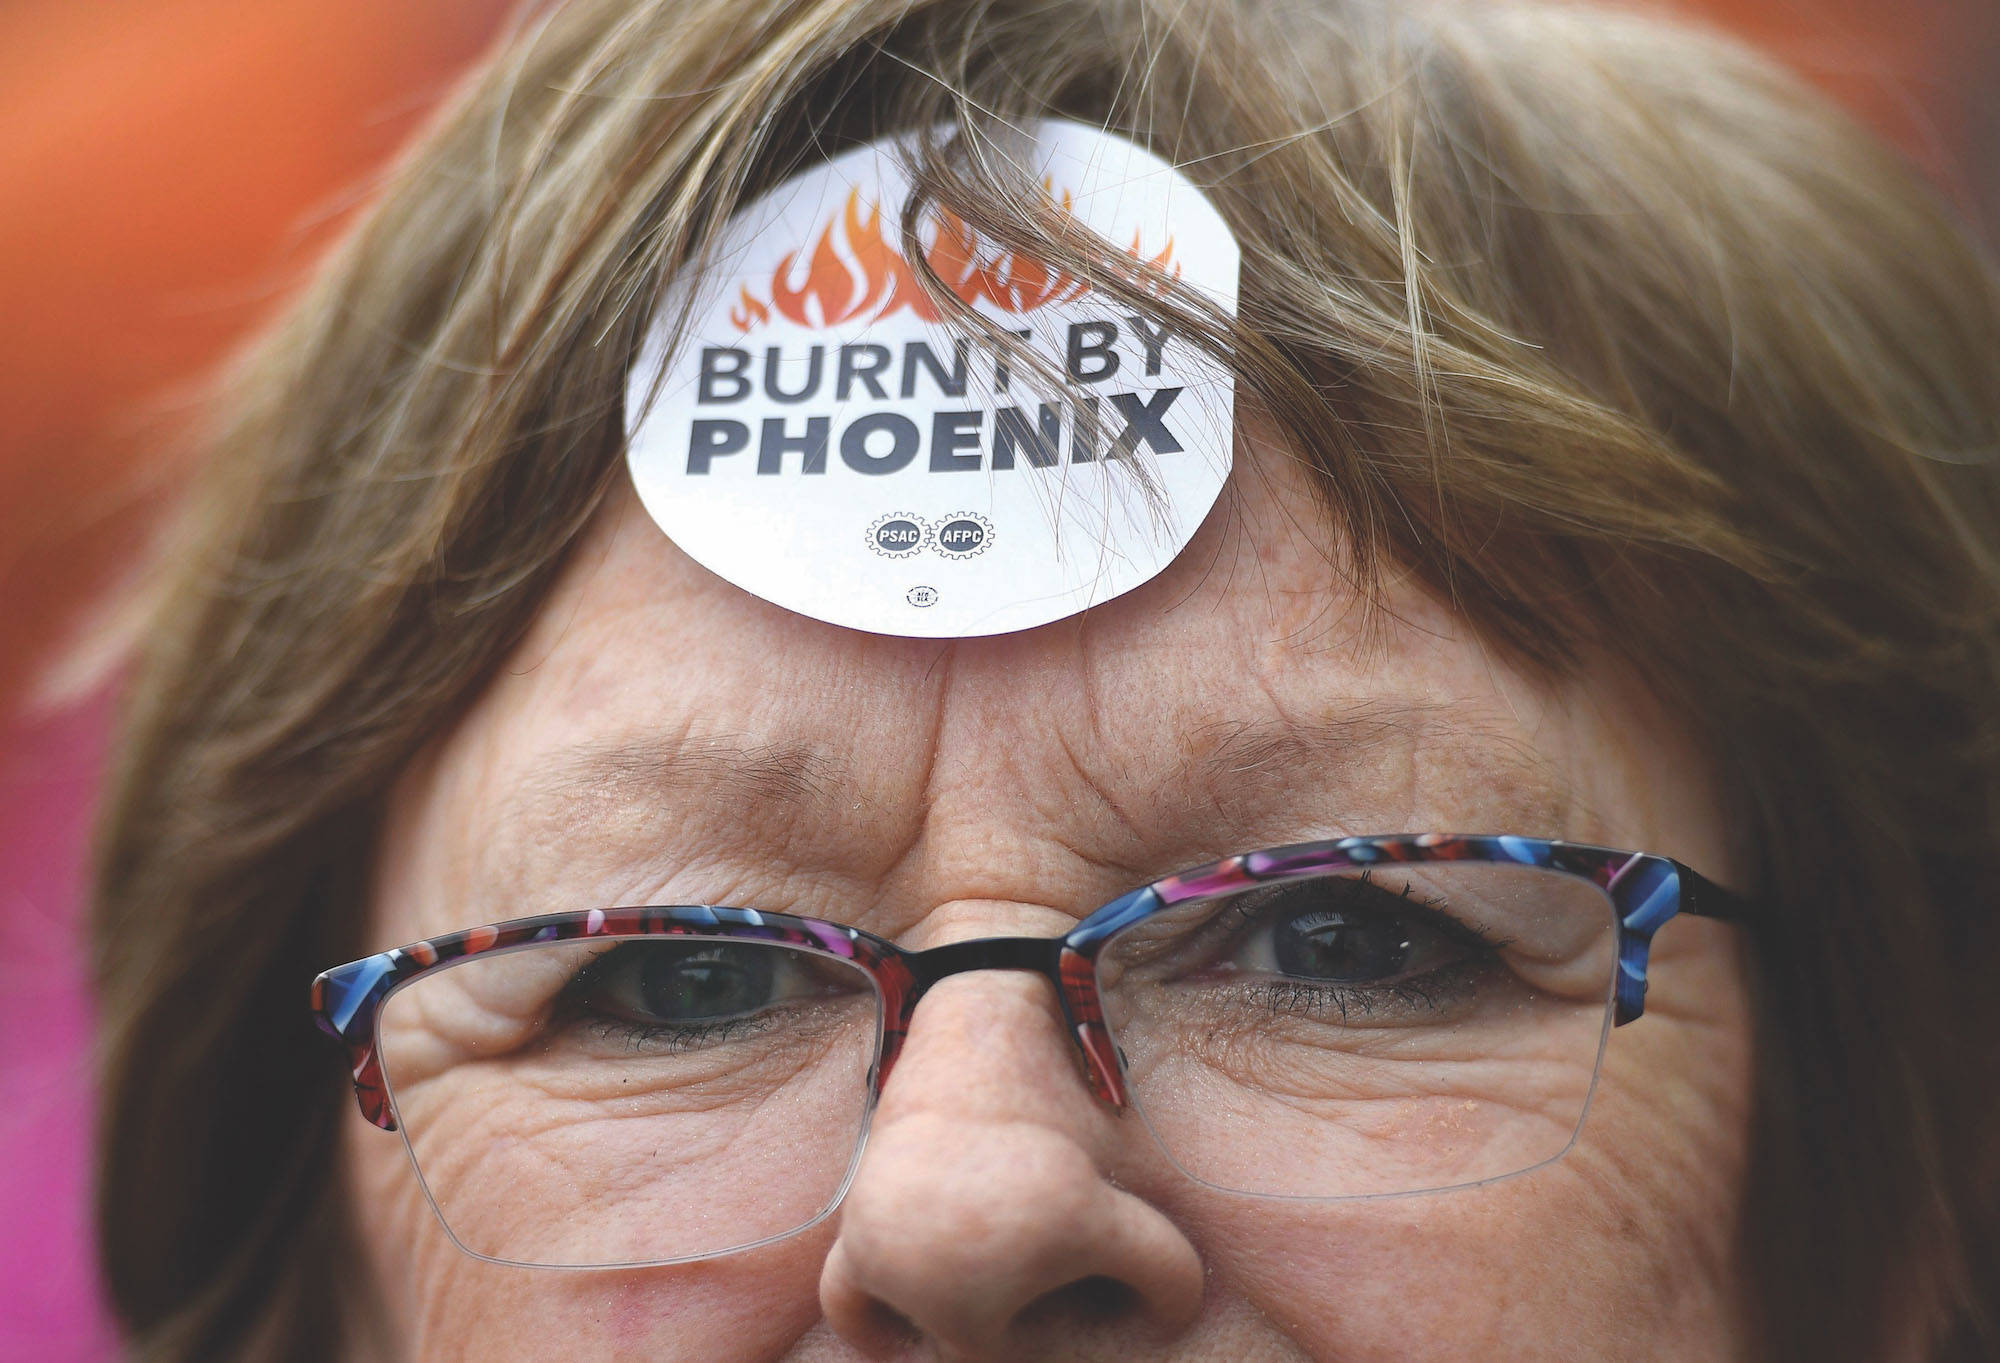 Shirley Taylor wears a “Burnt by Phoenix” sticker on her forehead during a rally against the Phoenix payroll system outside the offices of the Treasury Board of Canada in Ottawa on Wednesday, Feb. 28, 2018. THE CANADIAN PRESS/Justin Tang